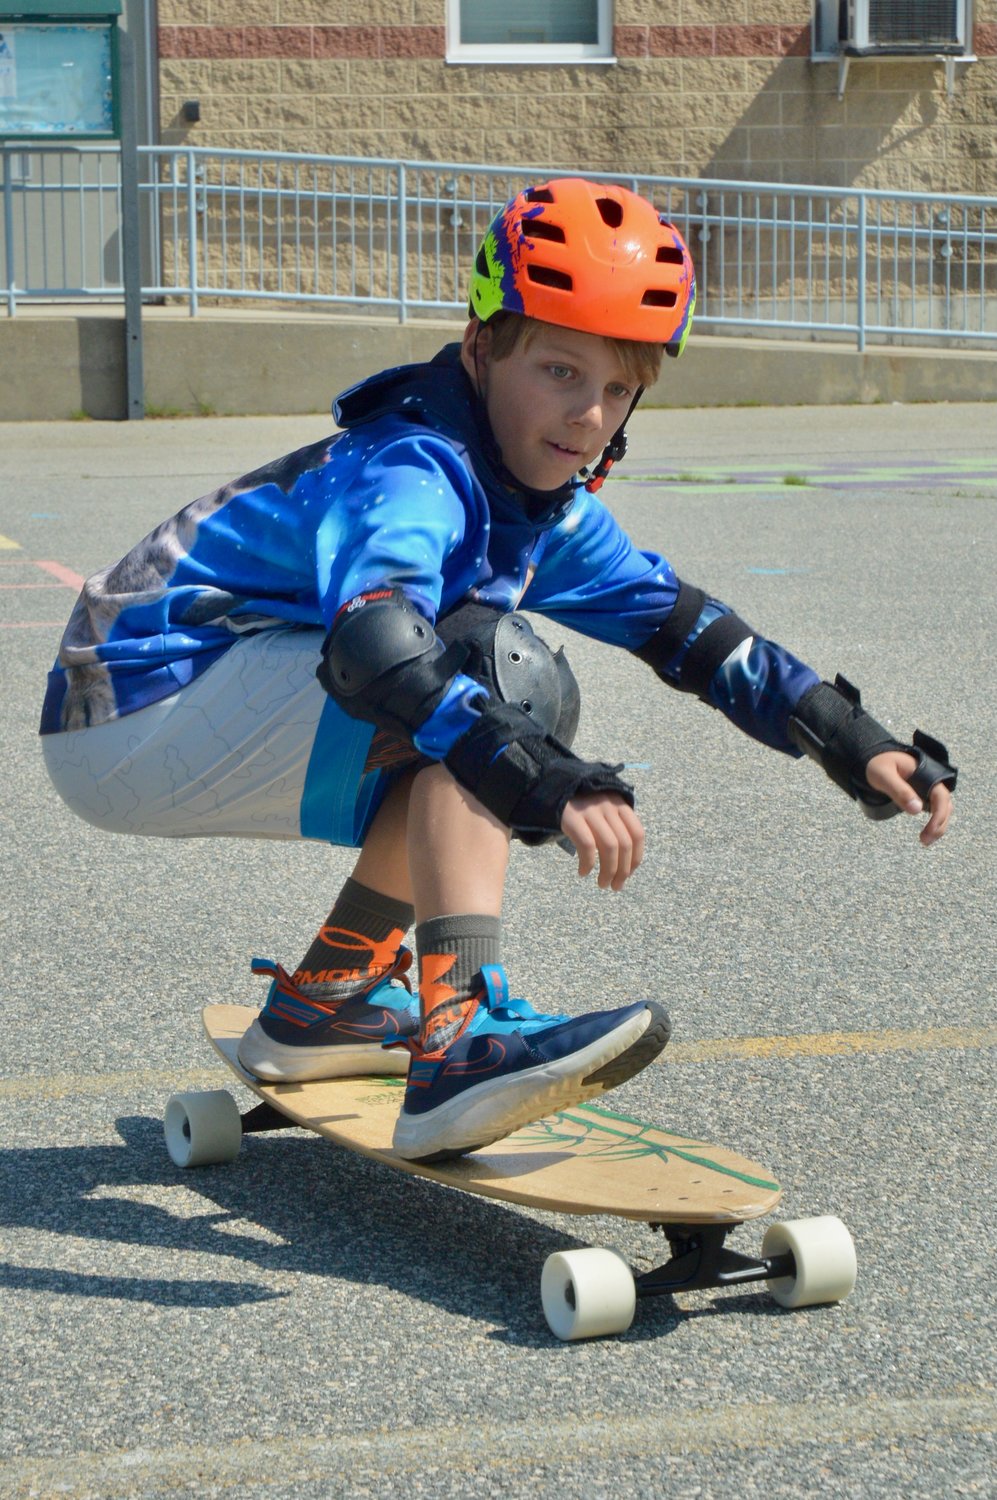 Colby, a fourth-grader at Melville School, proved to be one of the more advanced longboarders in Ryan Soares’s gym class on Monday, although the activity is ideal for all skill levels.